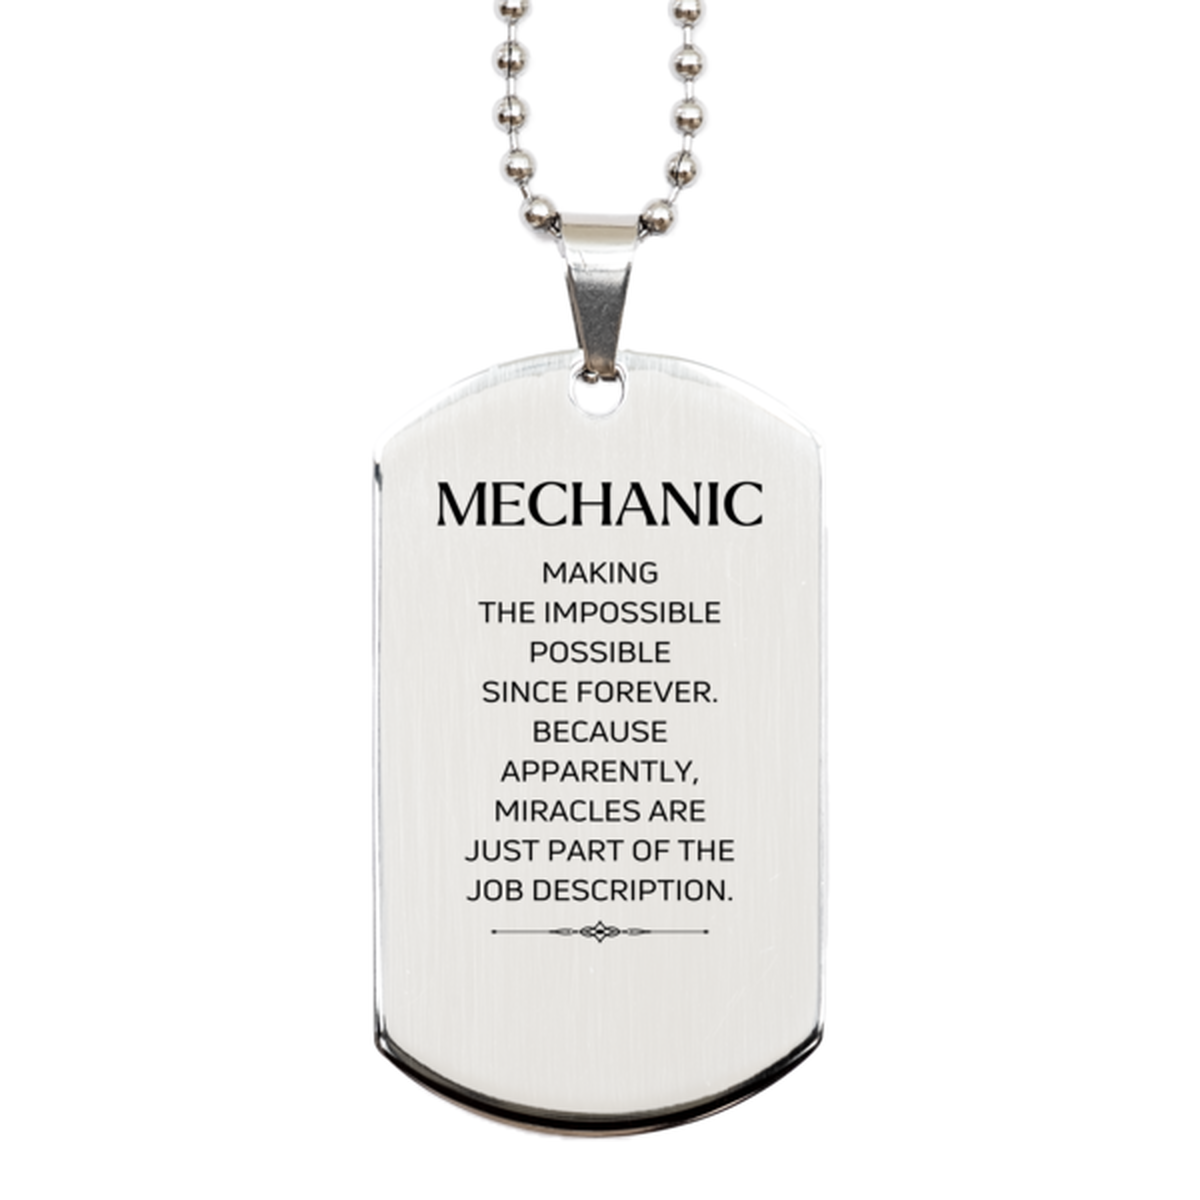 Funny Mechanic Gifts, Miracles are just part of the job description, Inspirational Birthday Silver Dog Tag For Mechanic, Men, Women, Coworkers, Friends, Boss